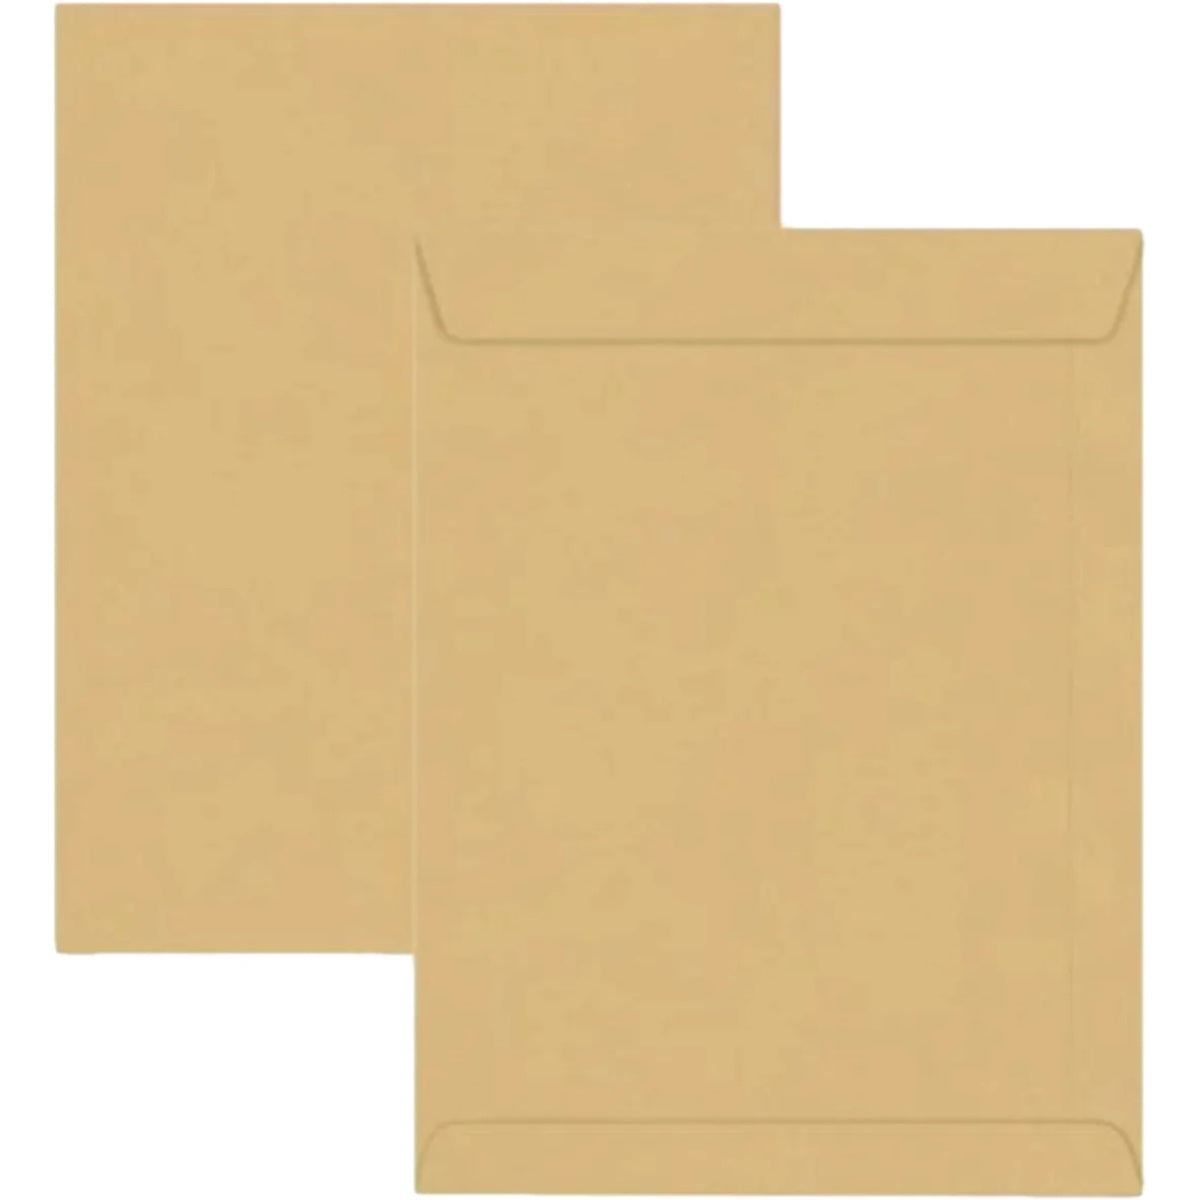 Hispapel Envelope 450 x 367 mm, 17.5 x14.5 inches, 100gsm, Brown